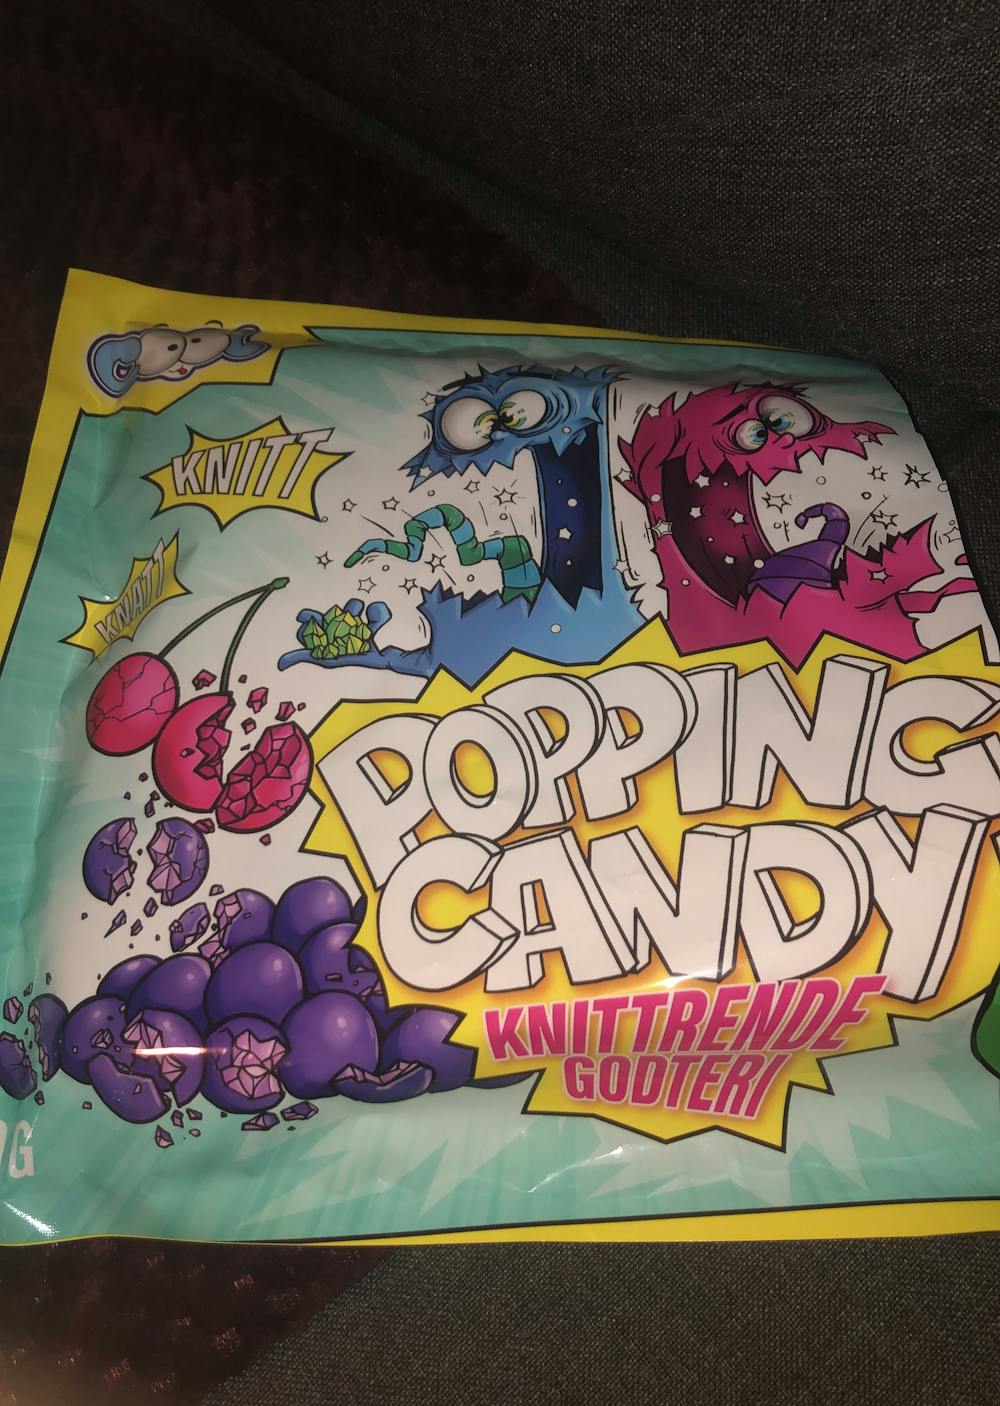 Popping candy, Cool